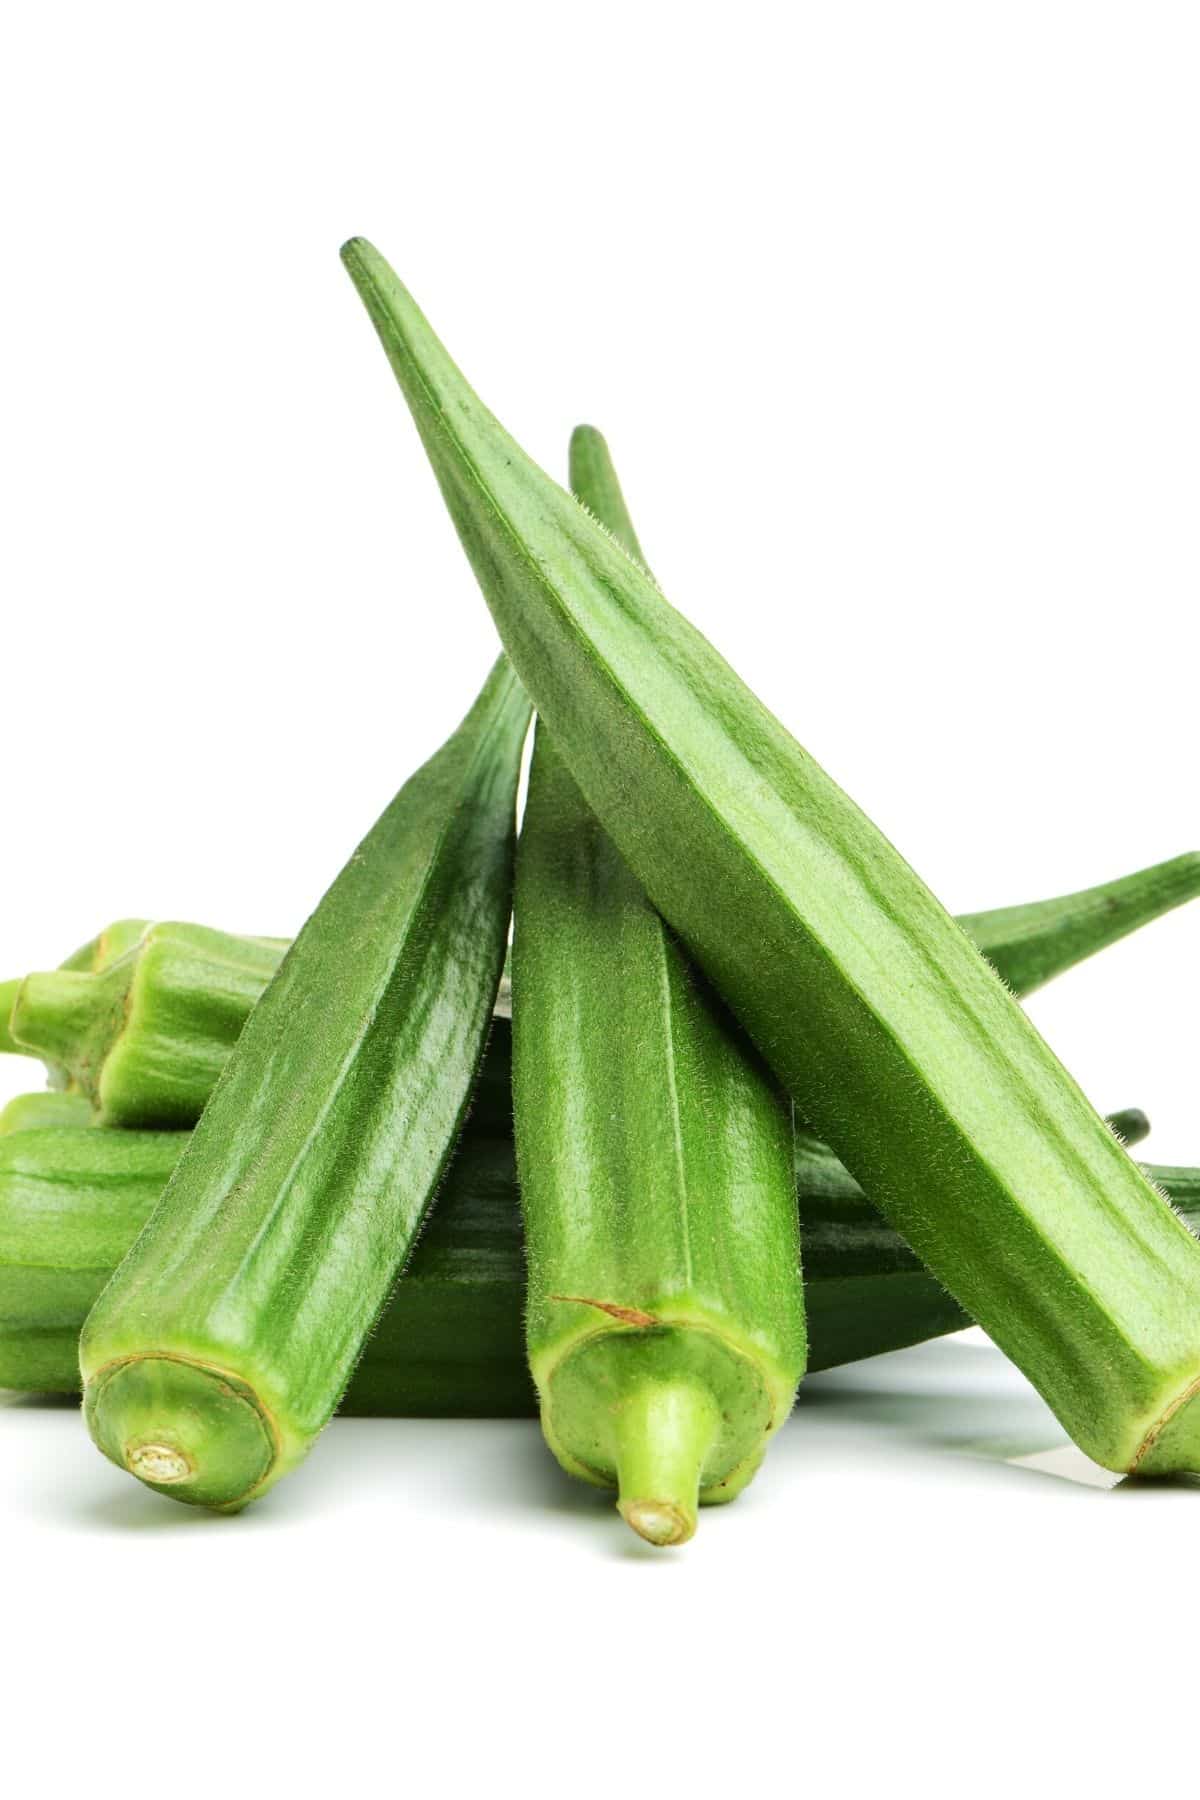 https://www.cleaneatingkitchen.com/wp-content/uploads/2022/02/fresh-okra-on-a-white-background.jpg